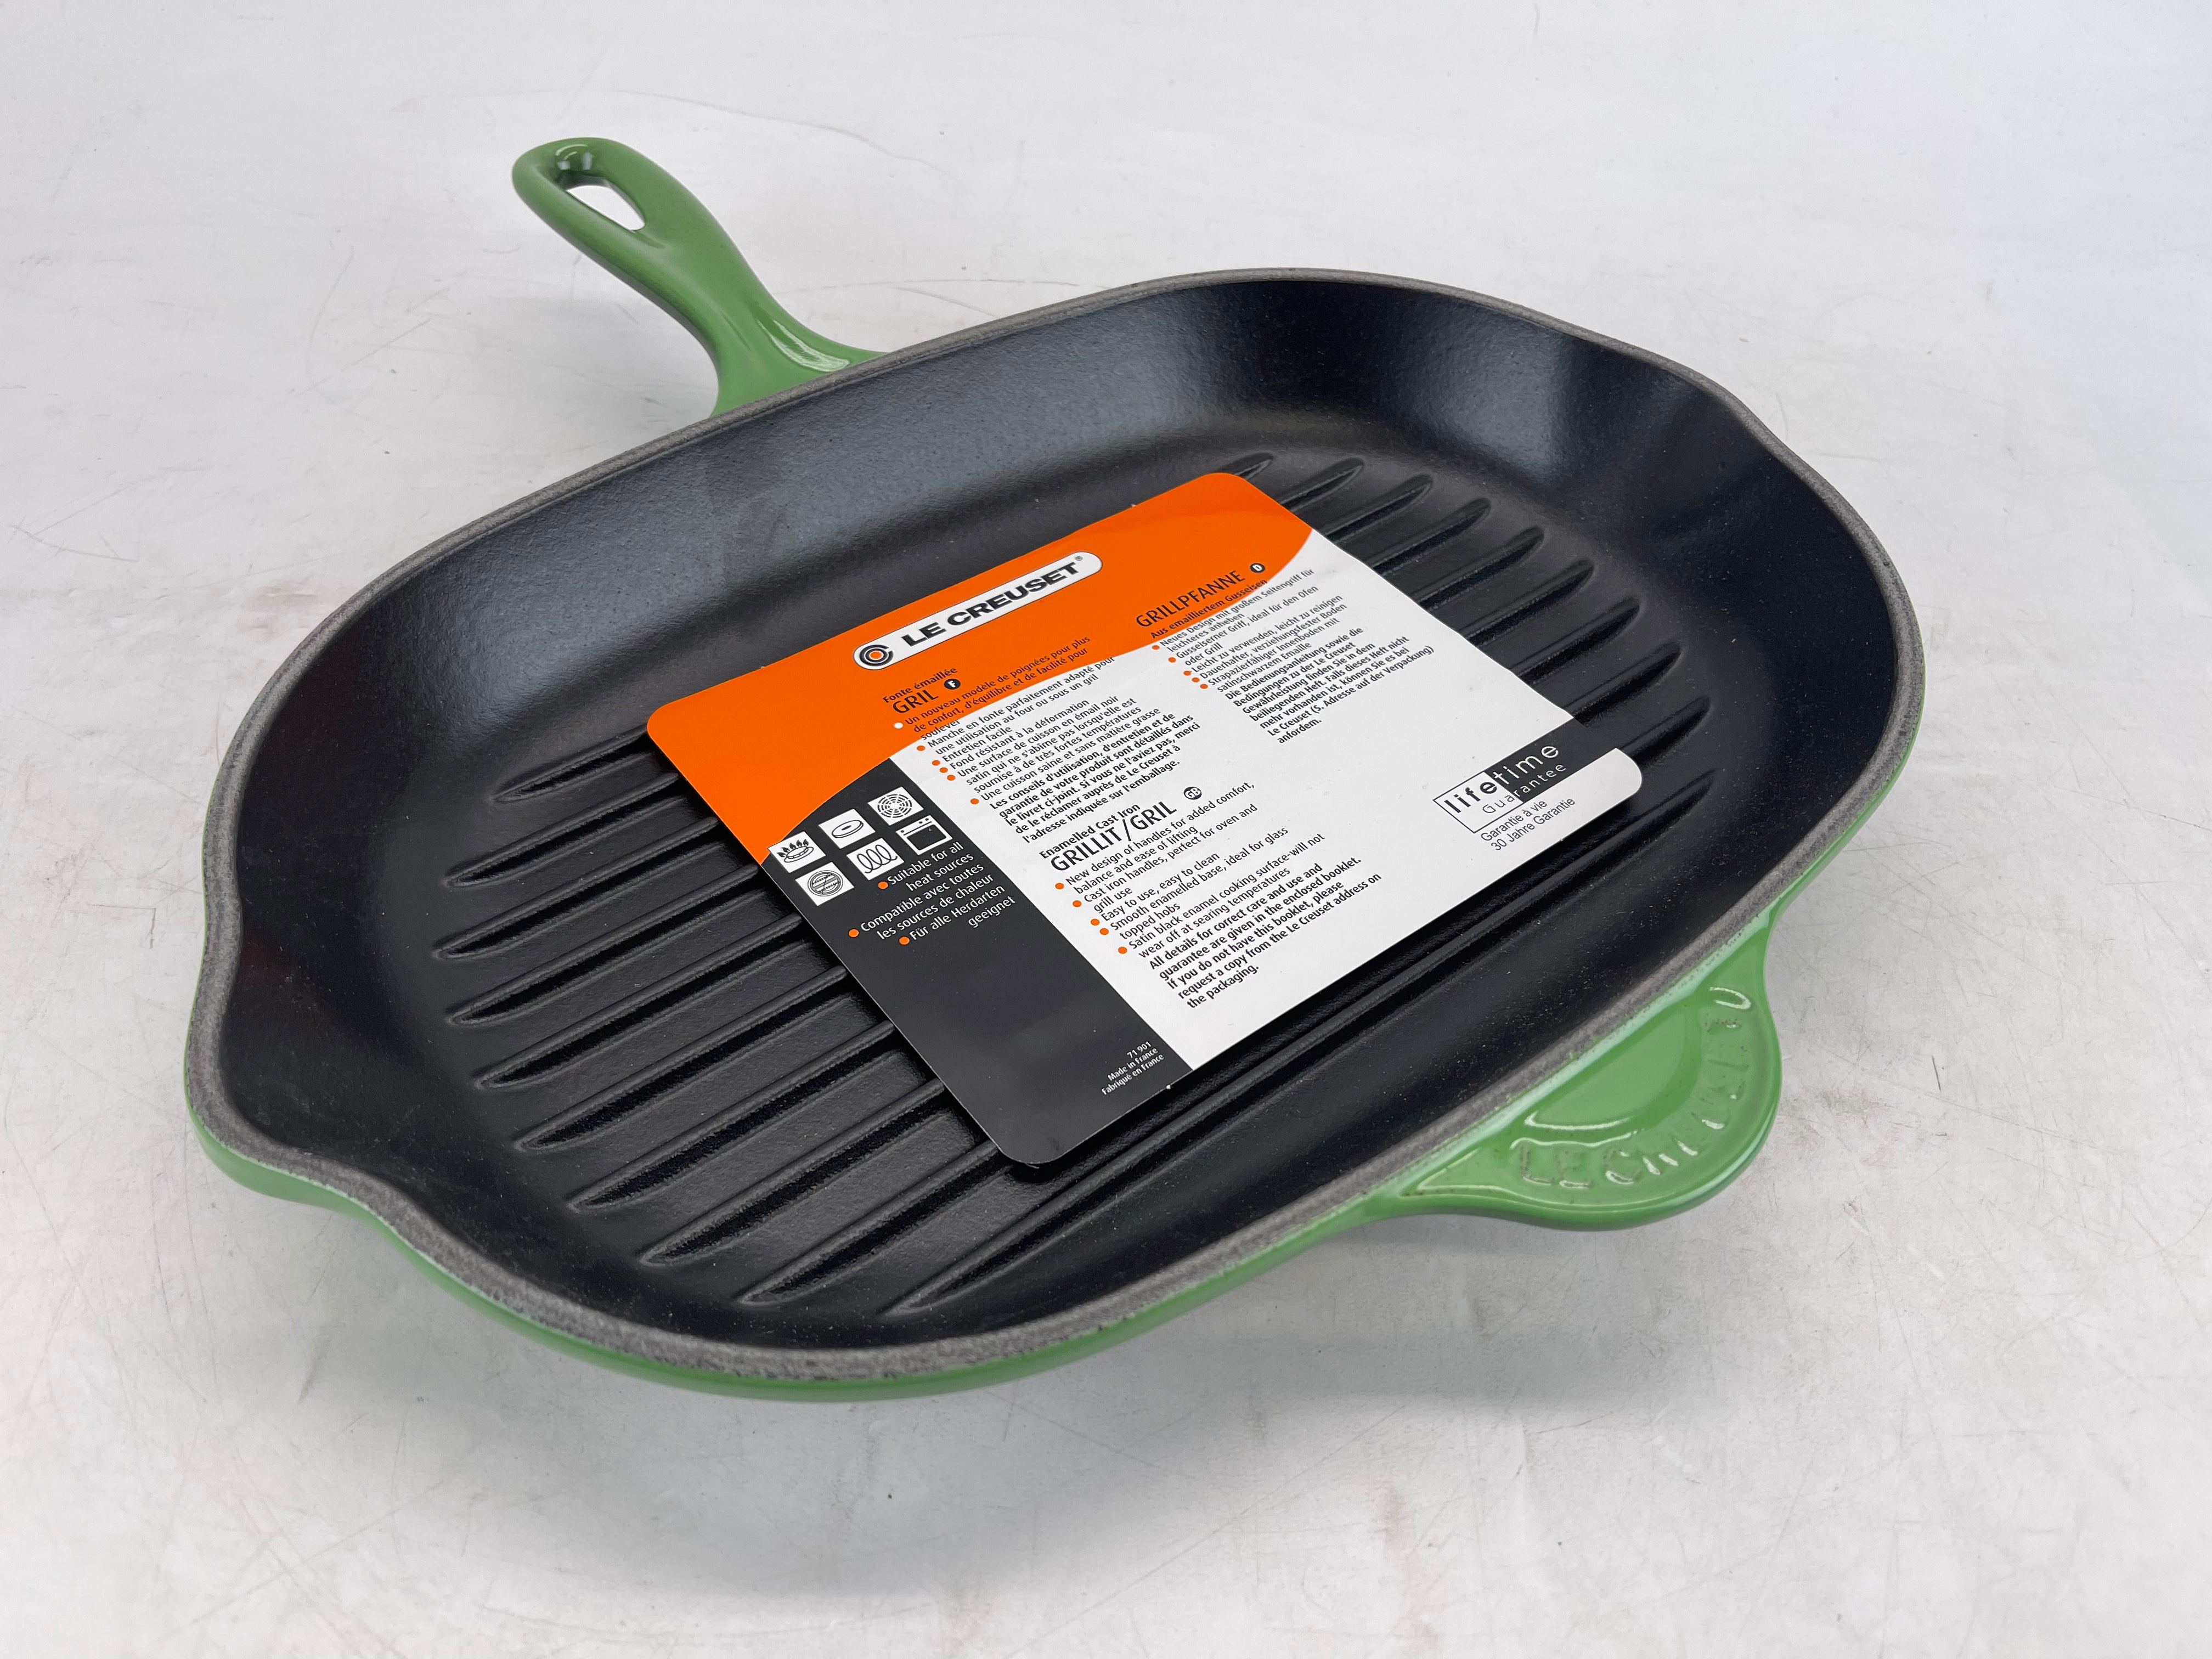 Le Creuset Cast Iron Oval Grillit 32cm 12.5in, Green